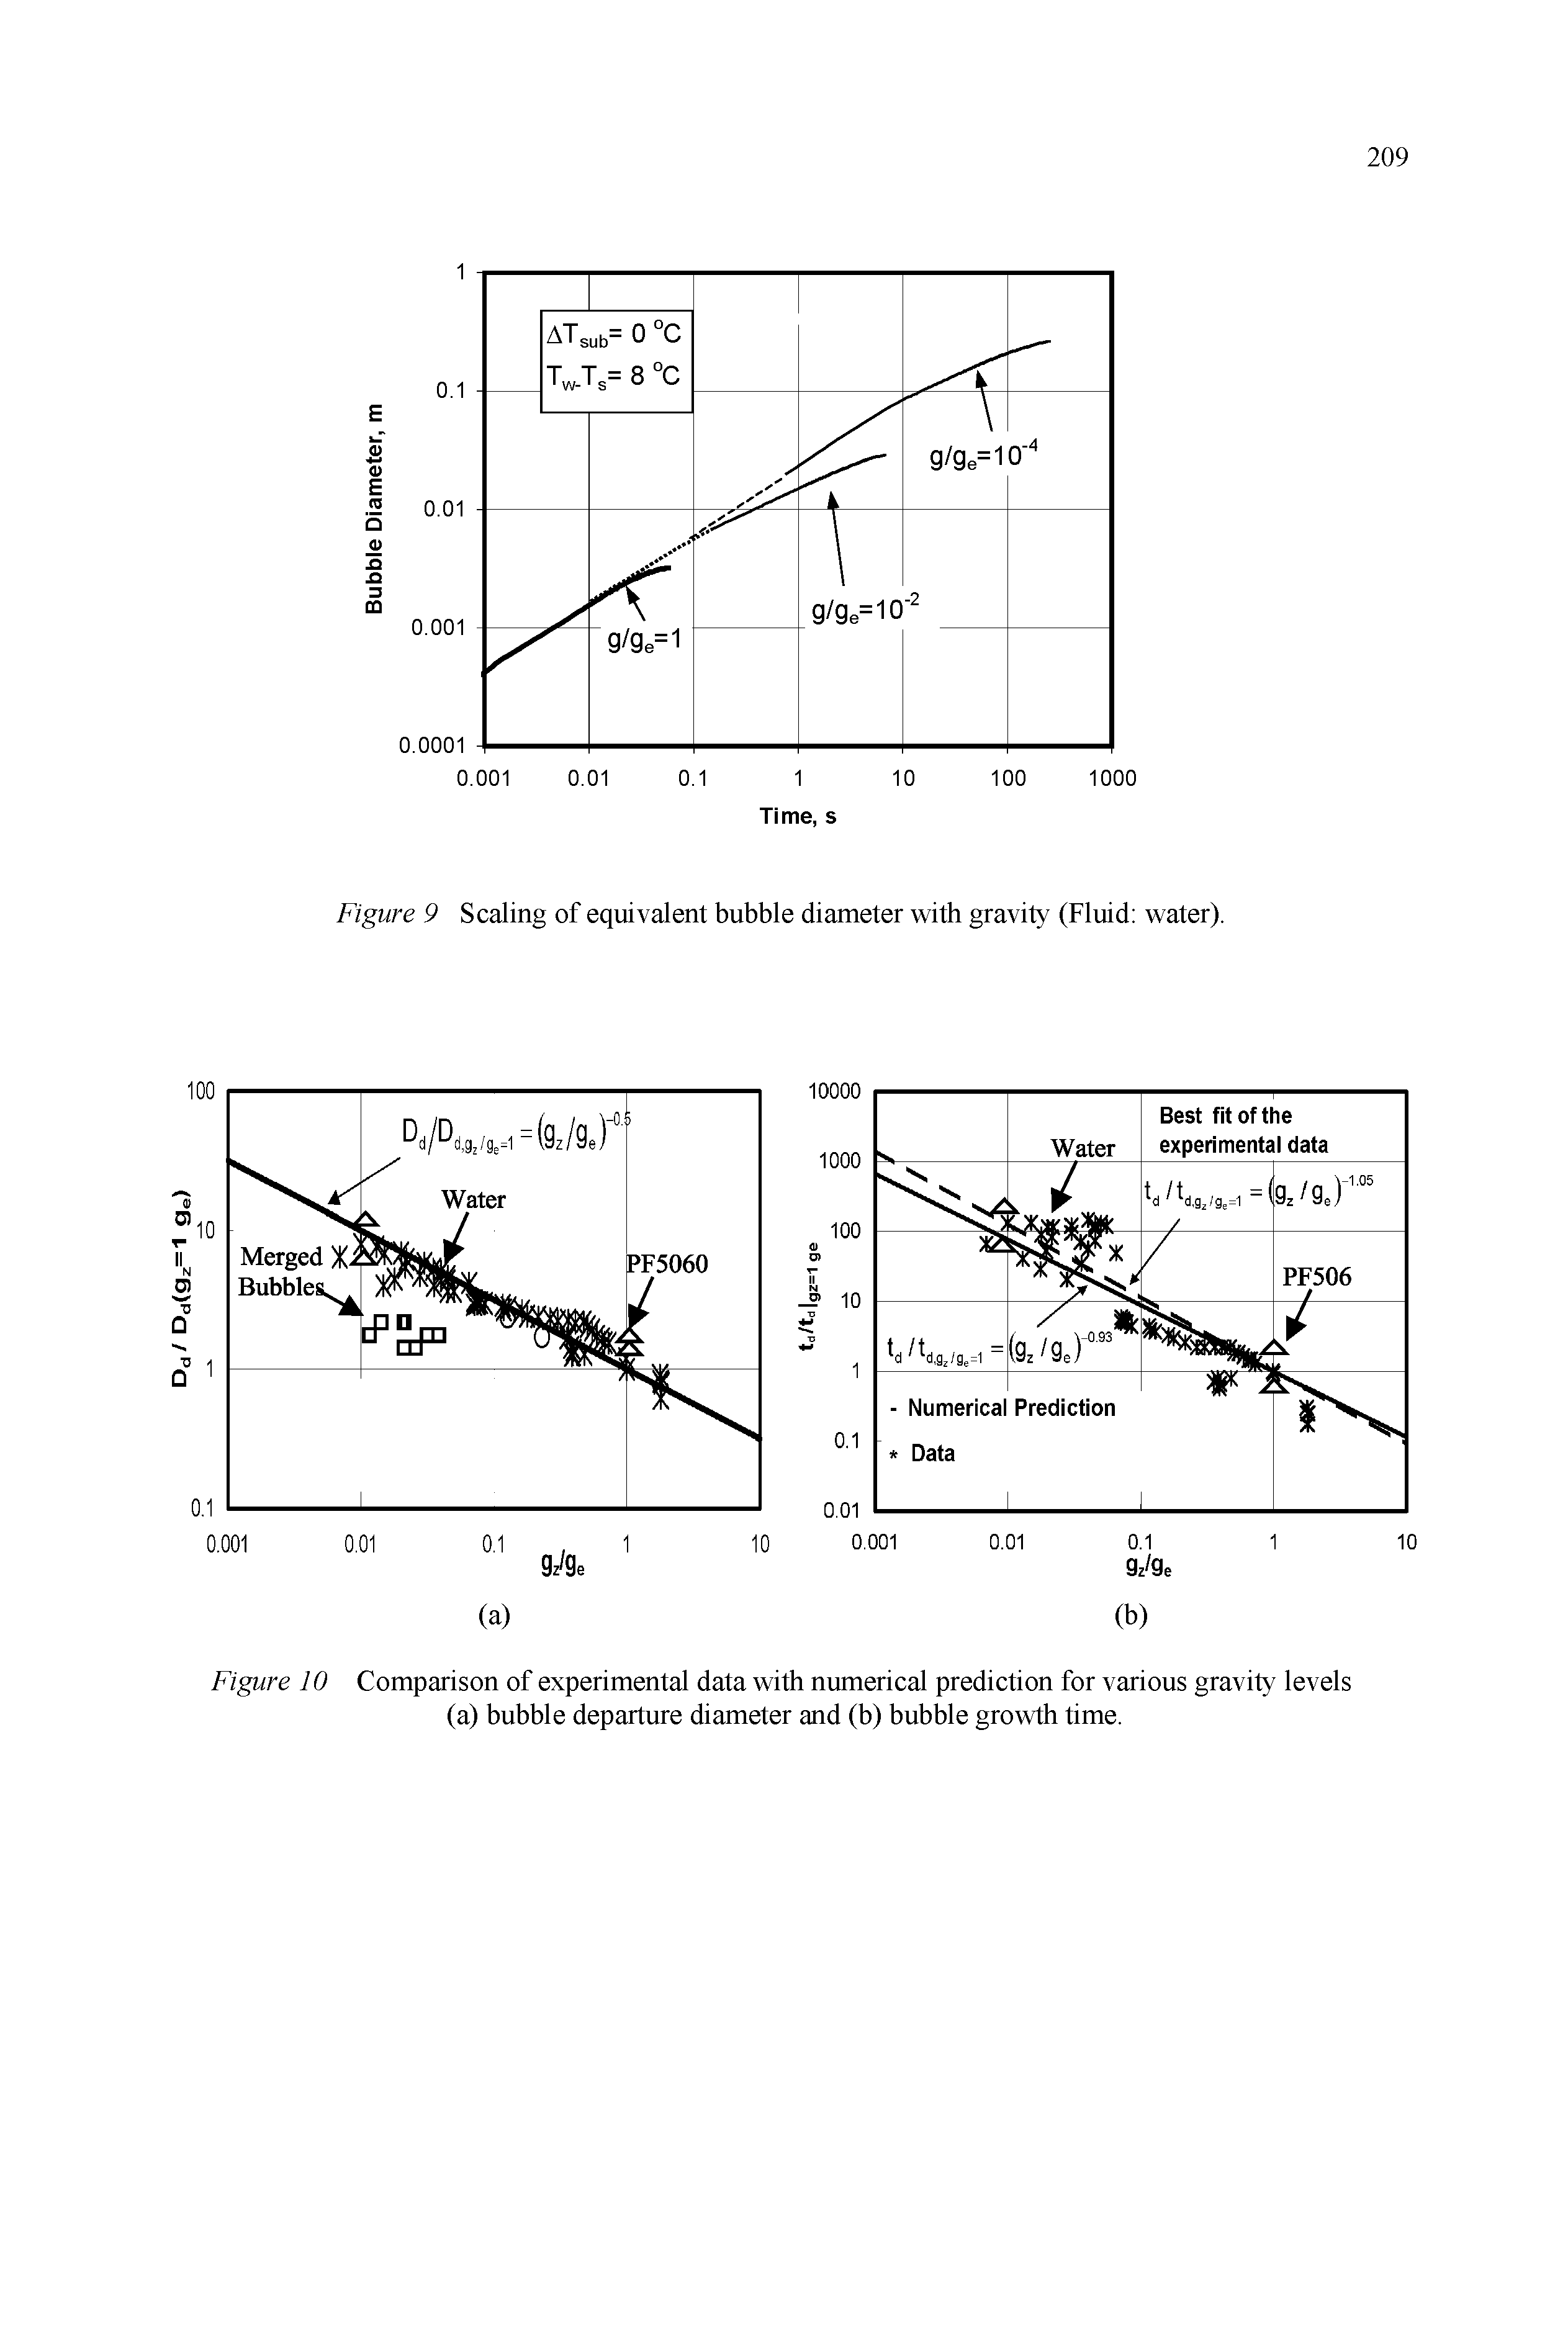 Figure 10 Comparison of experimental data with numerical prediction for various gravity levels (a) bubble departure diameter and (b) bubble growth time.